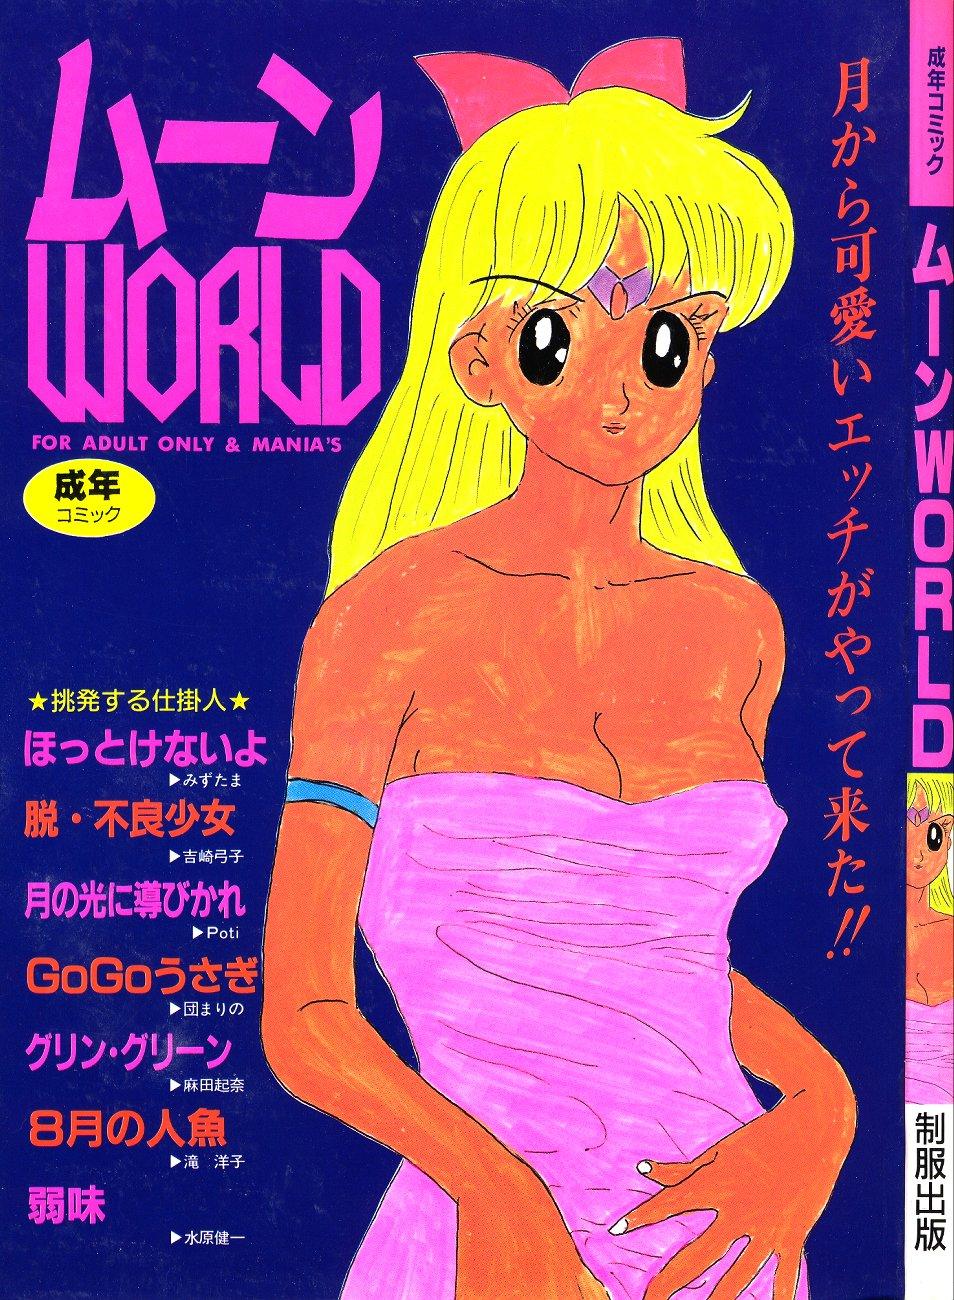 Anal Play Moon World - Sailor moon Camshow - Page 2